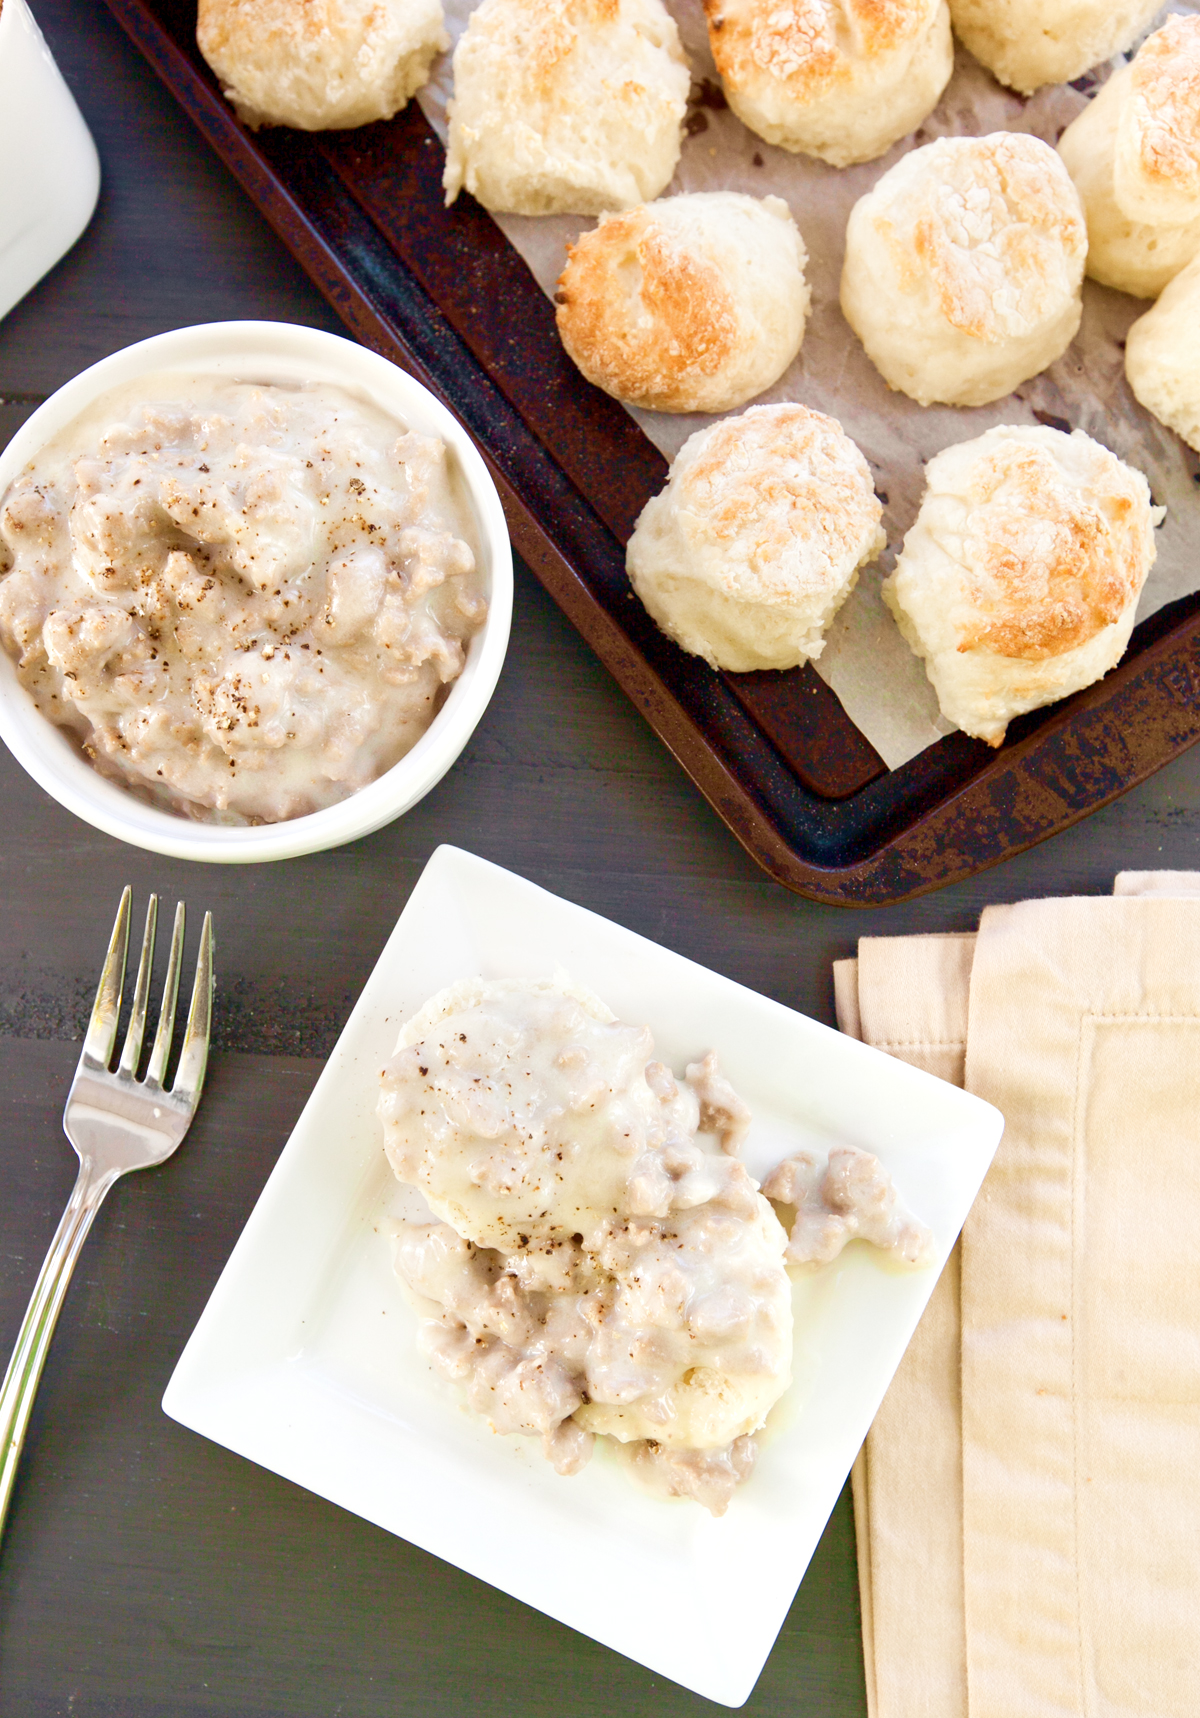 An overhead view of turkey sausage gravy spooned over some biscuits, with a tray of low calorie biscuits in the background.